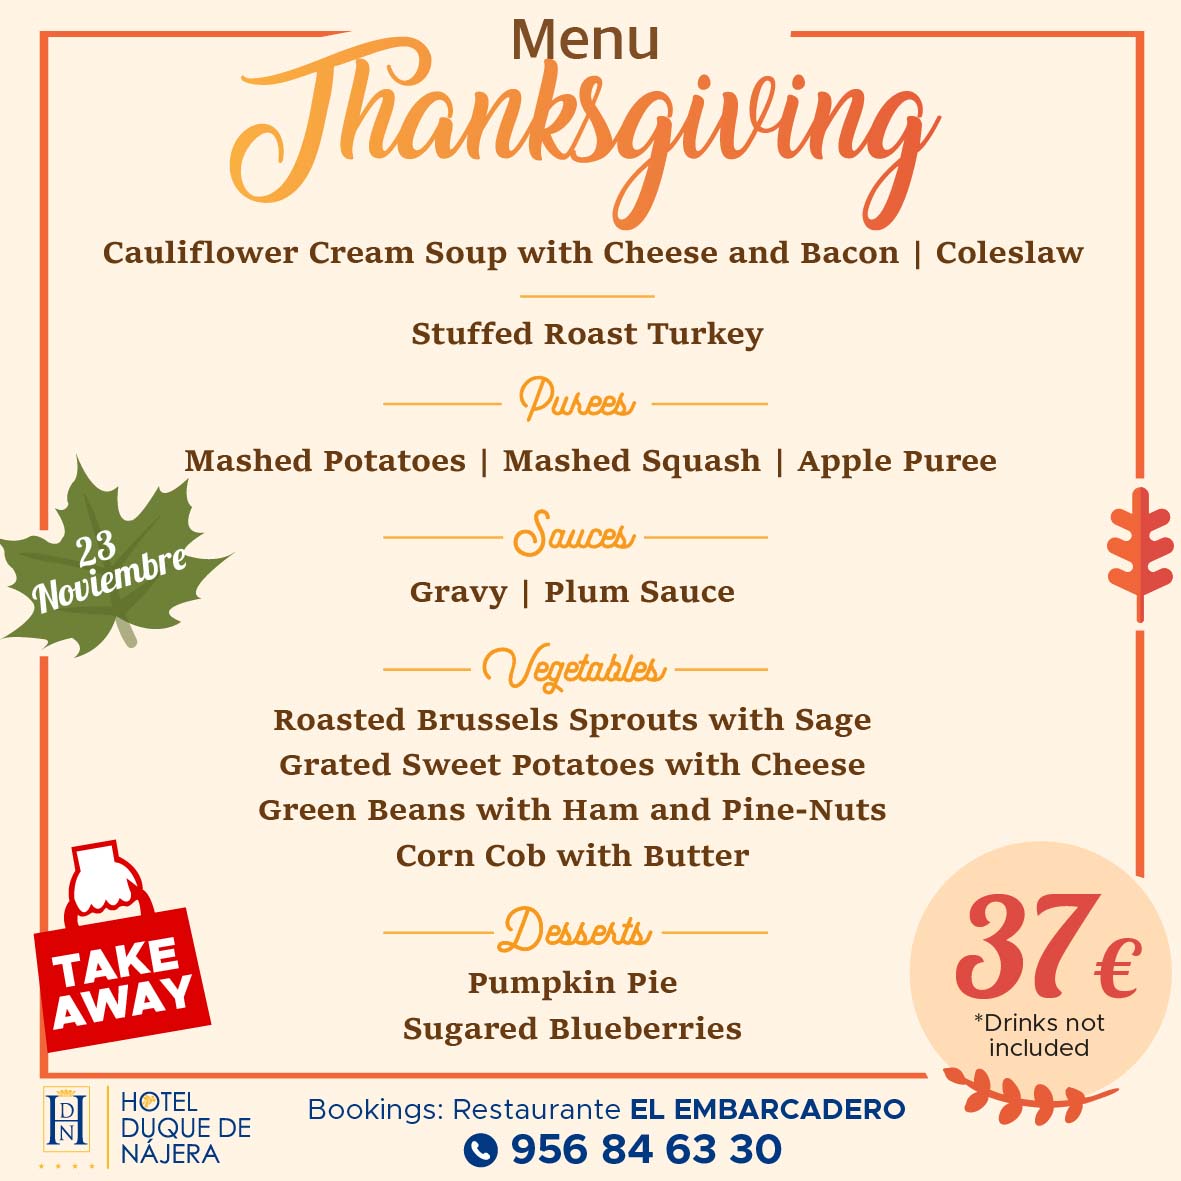 Celebrate Thanks giving day in our El Embarcadero Restaurant - HACE